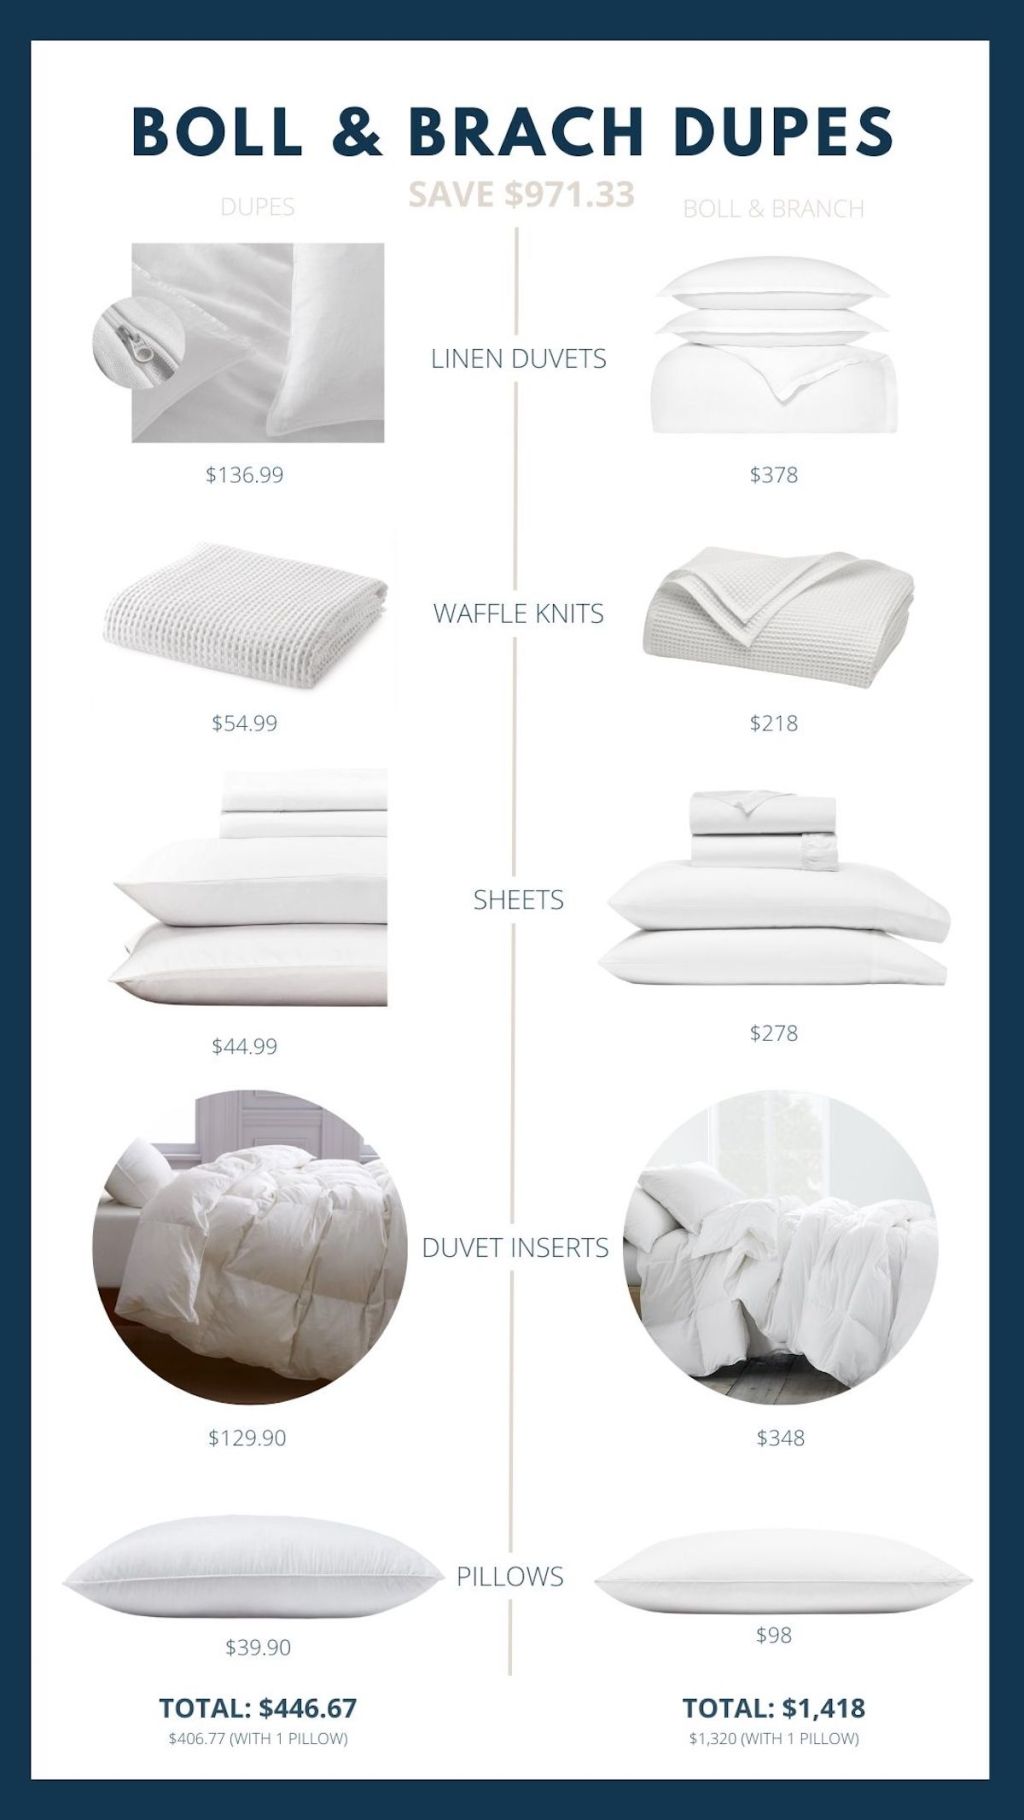 graphic with comparisons between white boll and branch bedding essentials and affordable alternatives